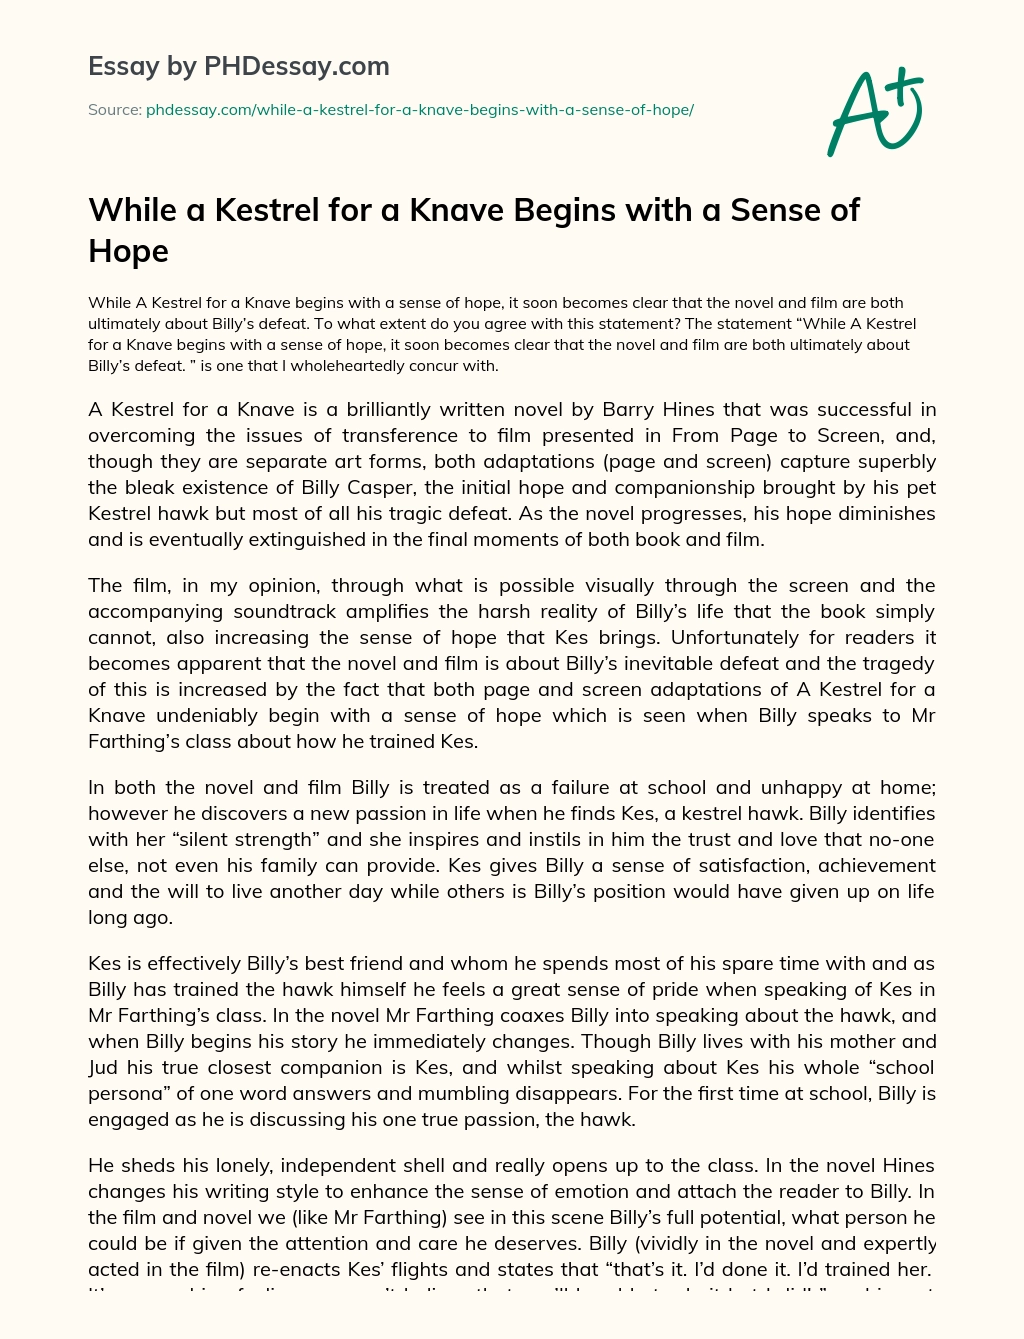 While a Kestrel for a Knave Begins with a Sense of Hope essay